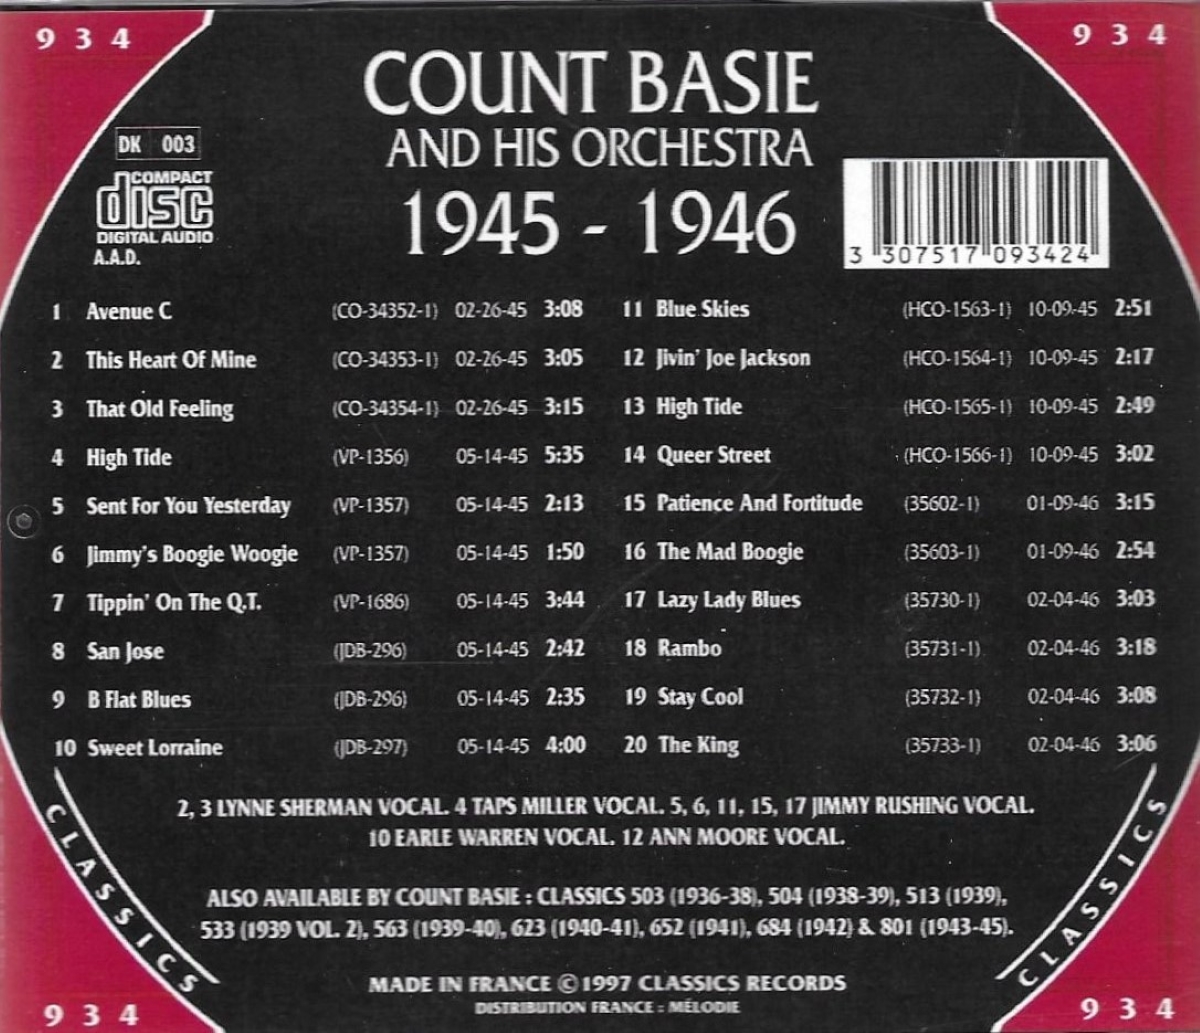 The Chronological Count Basie And His Orchestra-1945-1946